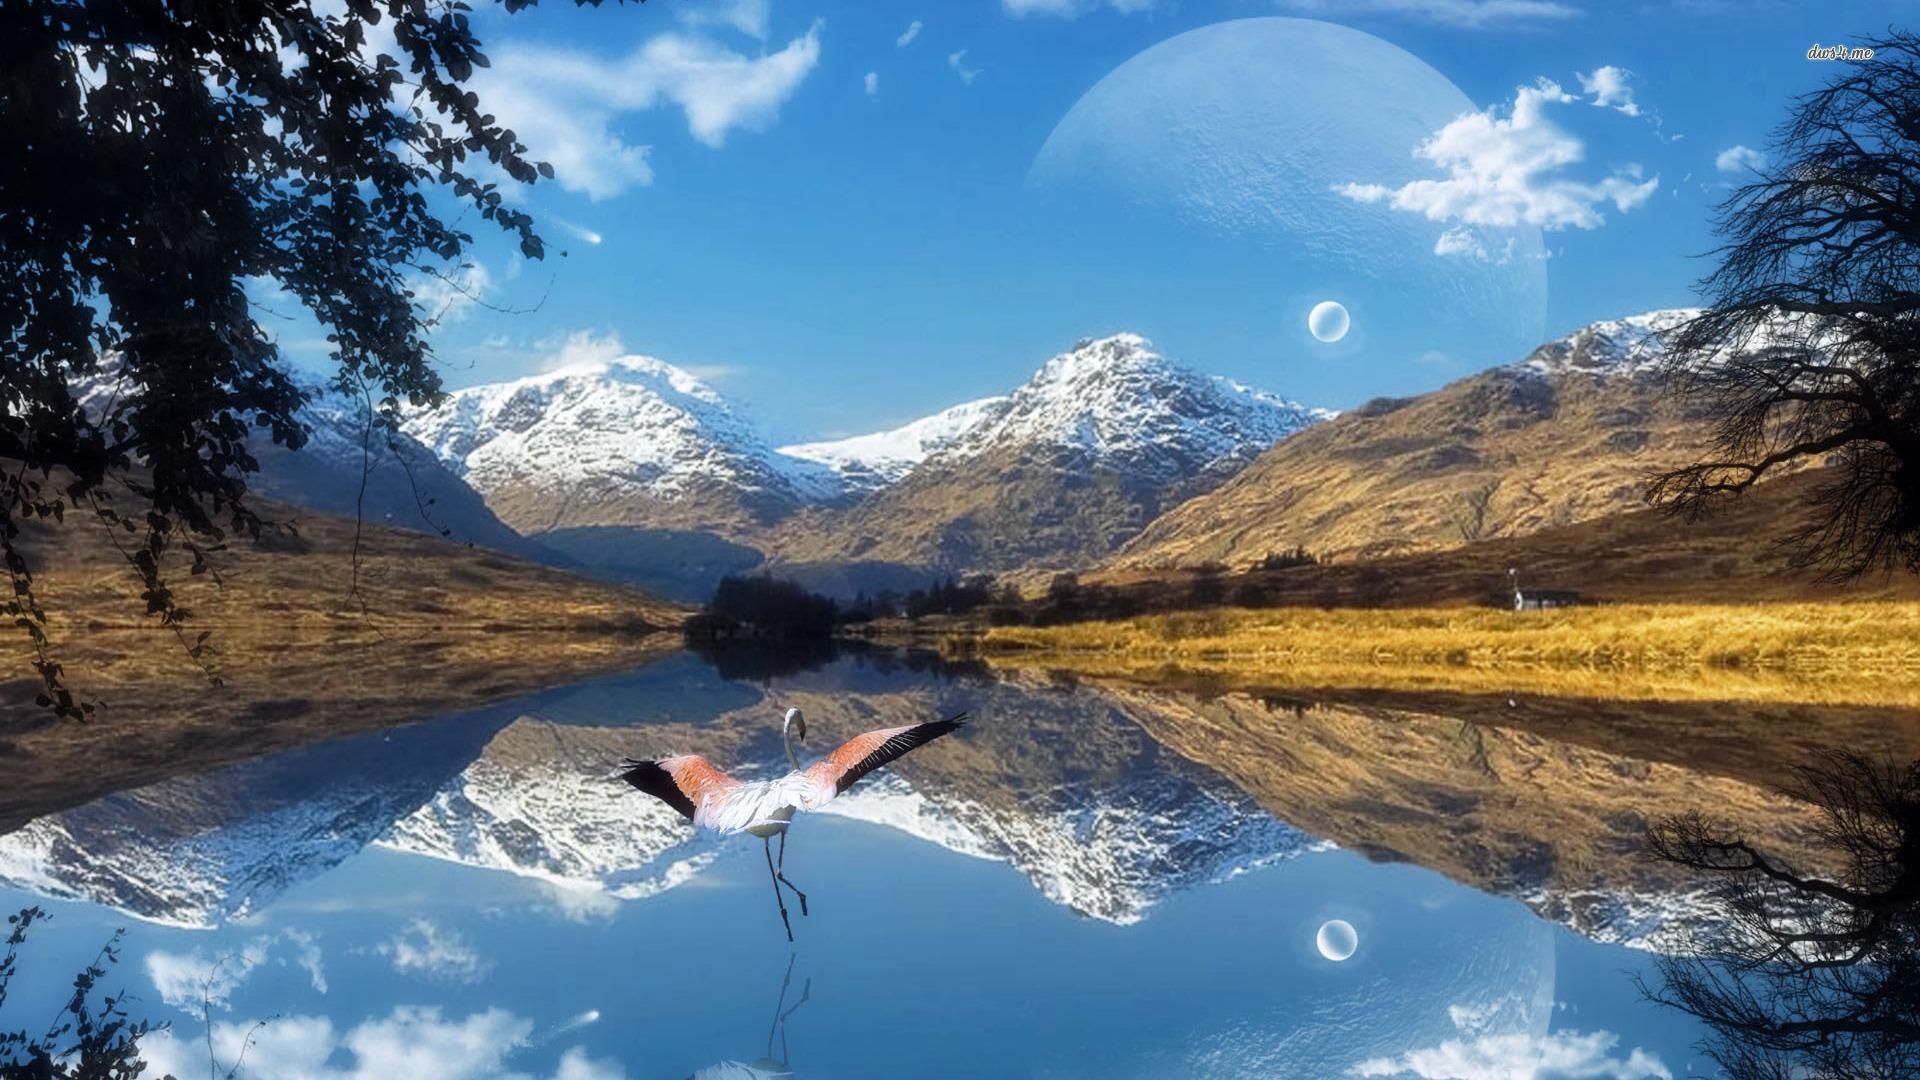 Moon reflection in the mountain lake wallpaper